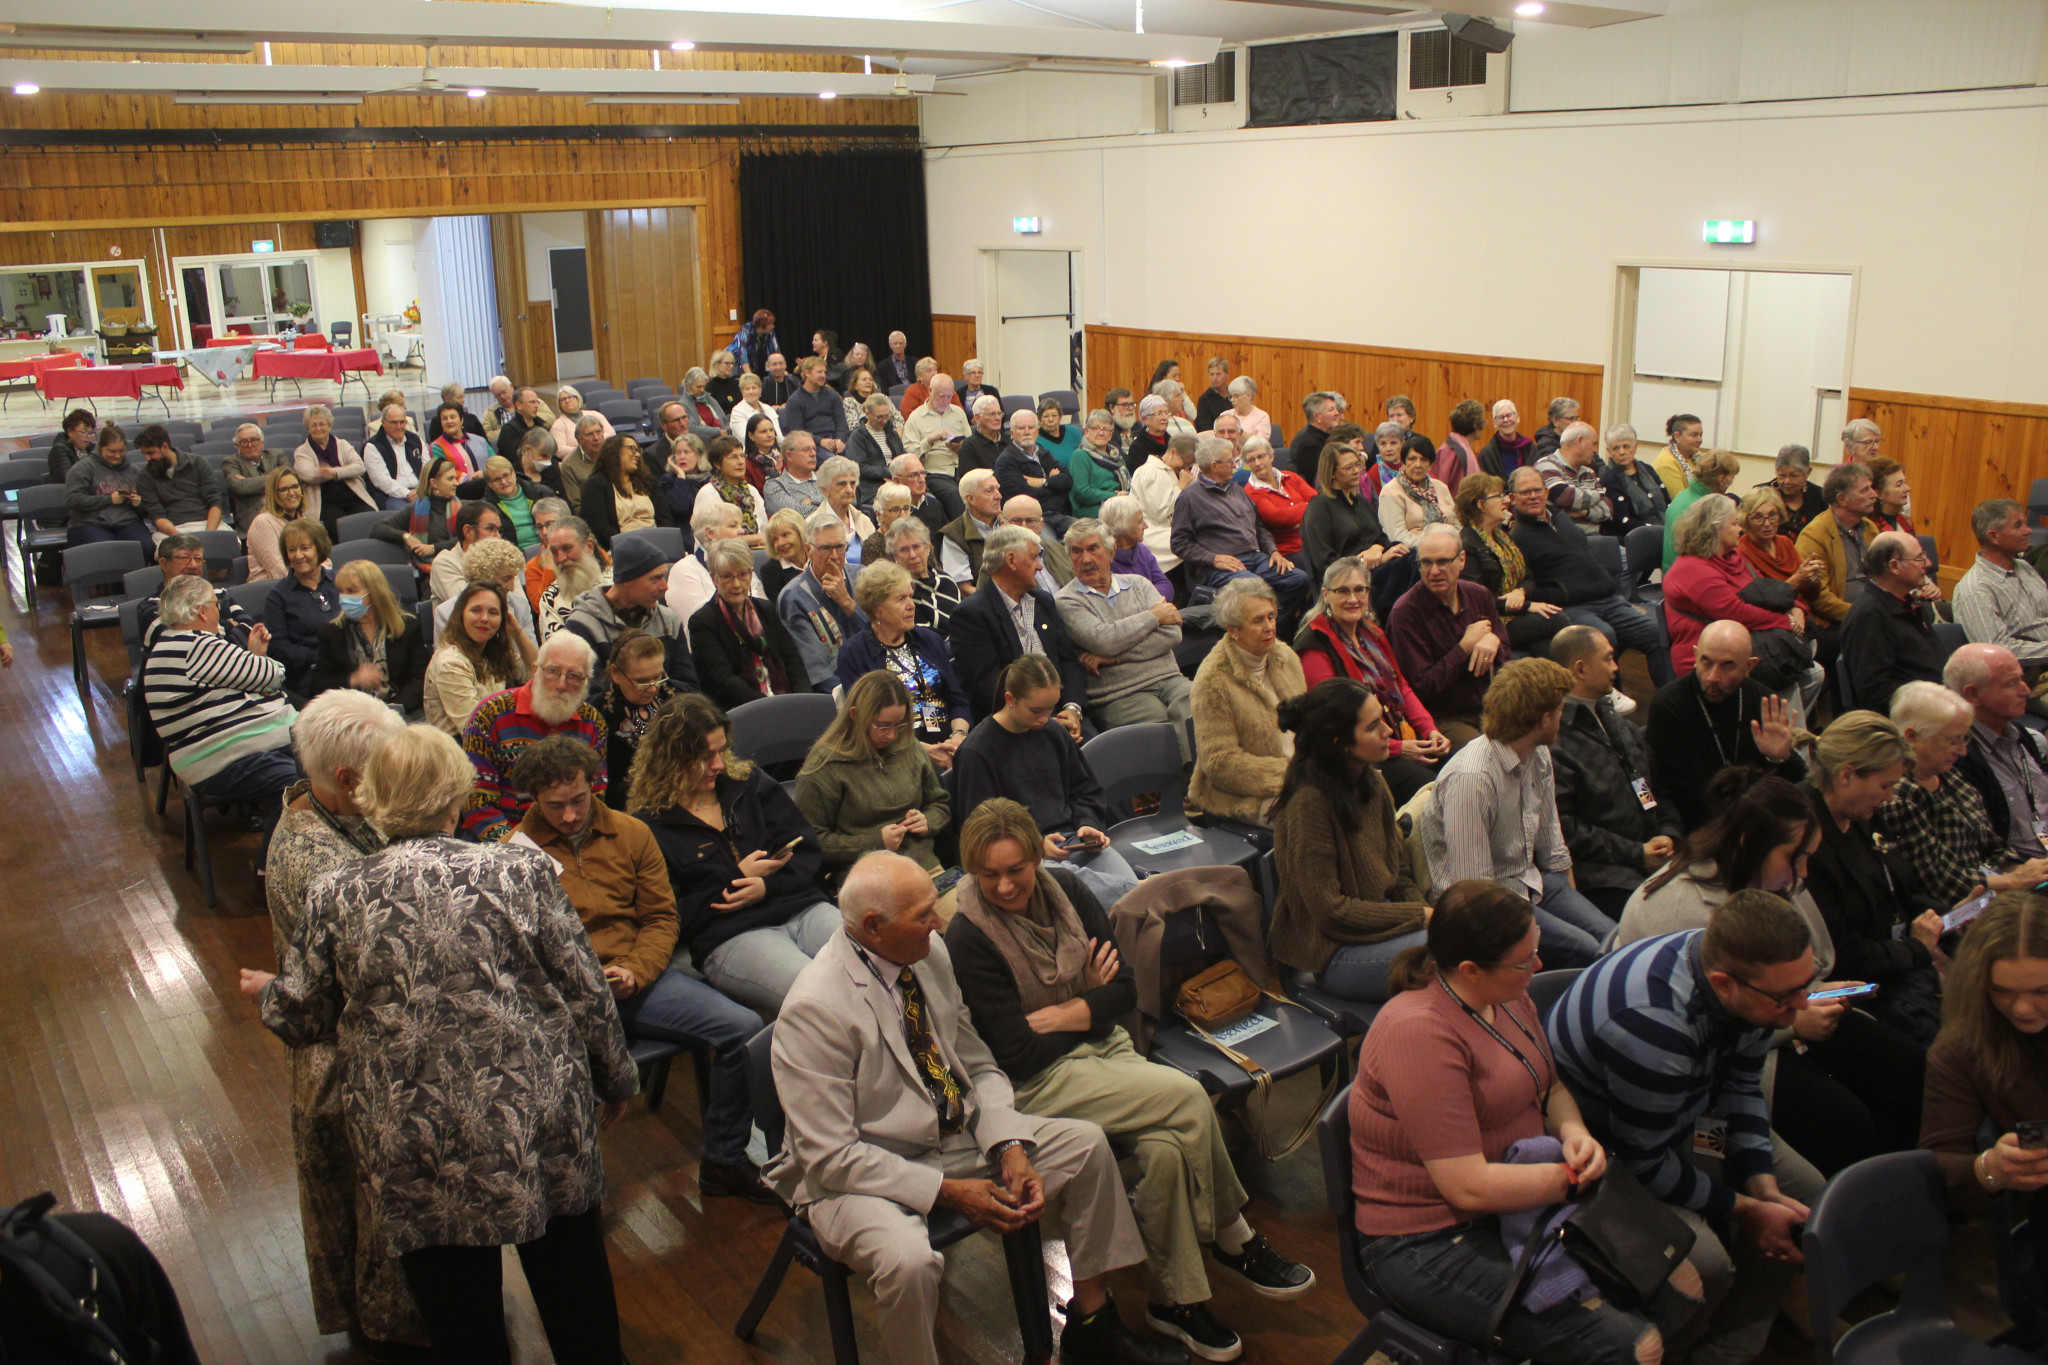 An eager crowd gathered quickly in the Gilgandra Shire Hall once the doors were opened. Within minutes, most of the rows had been filled, with more of the audience still to come.